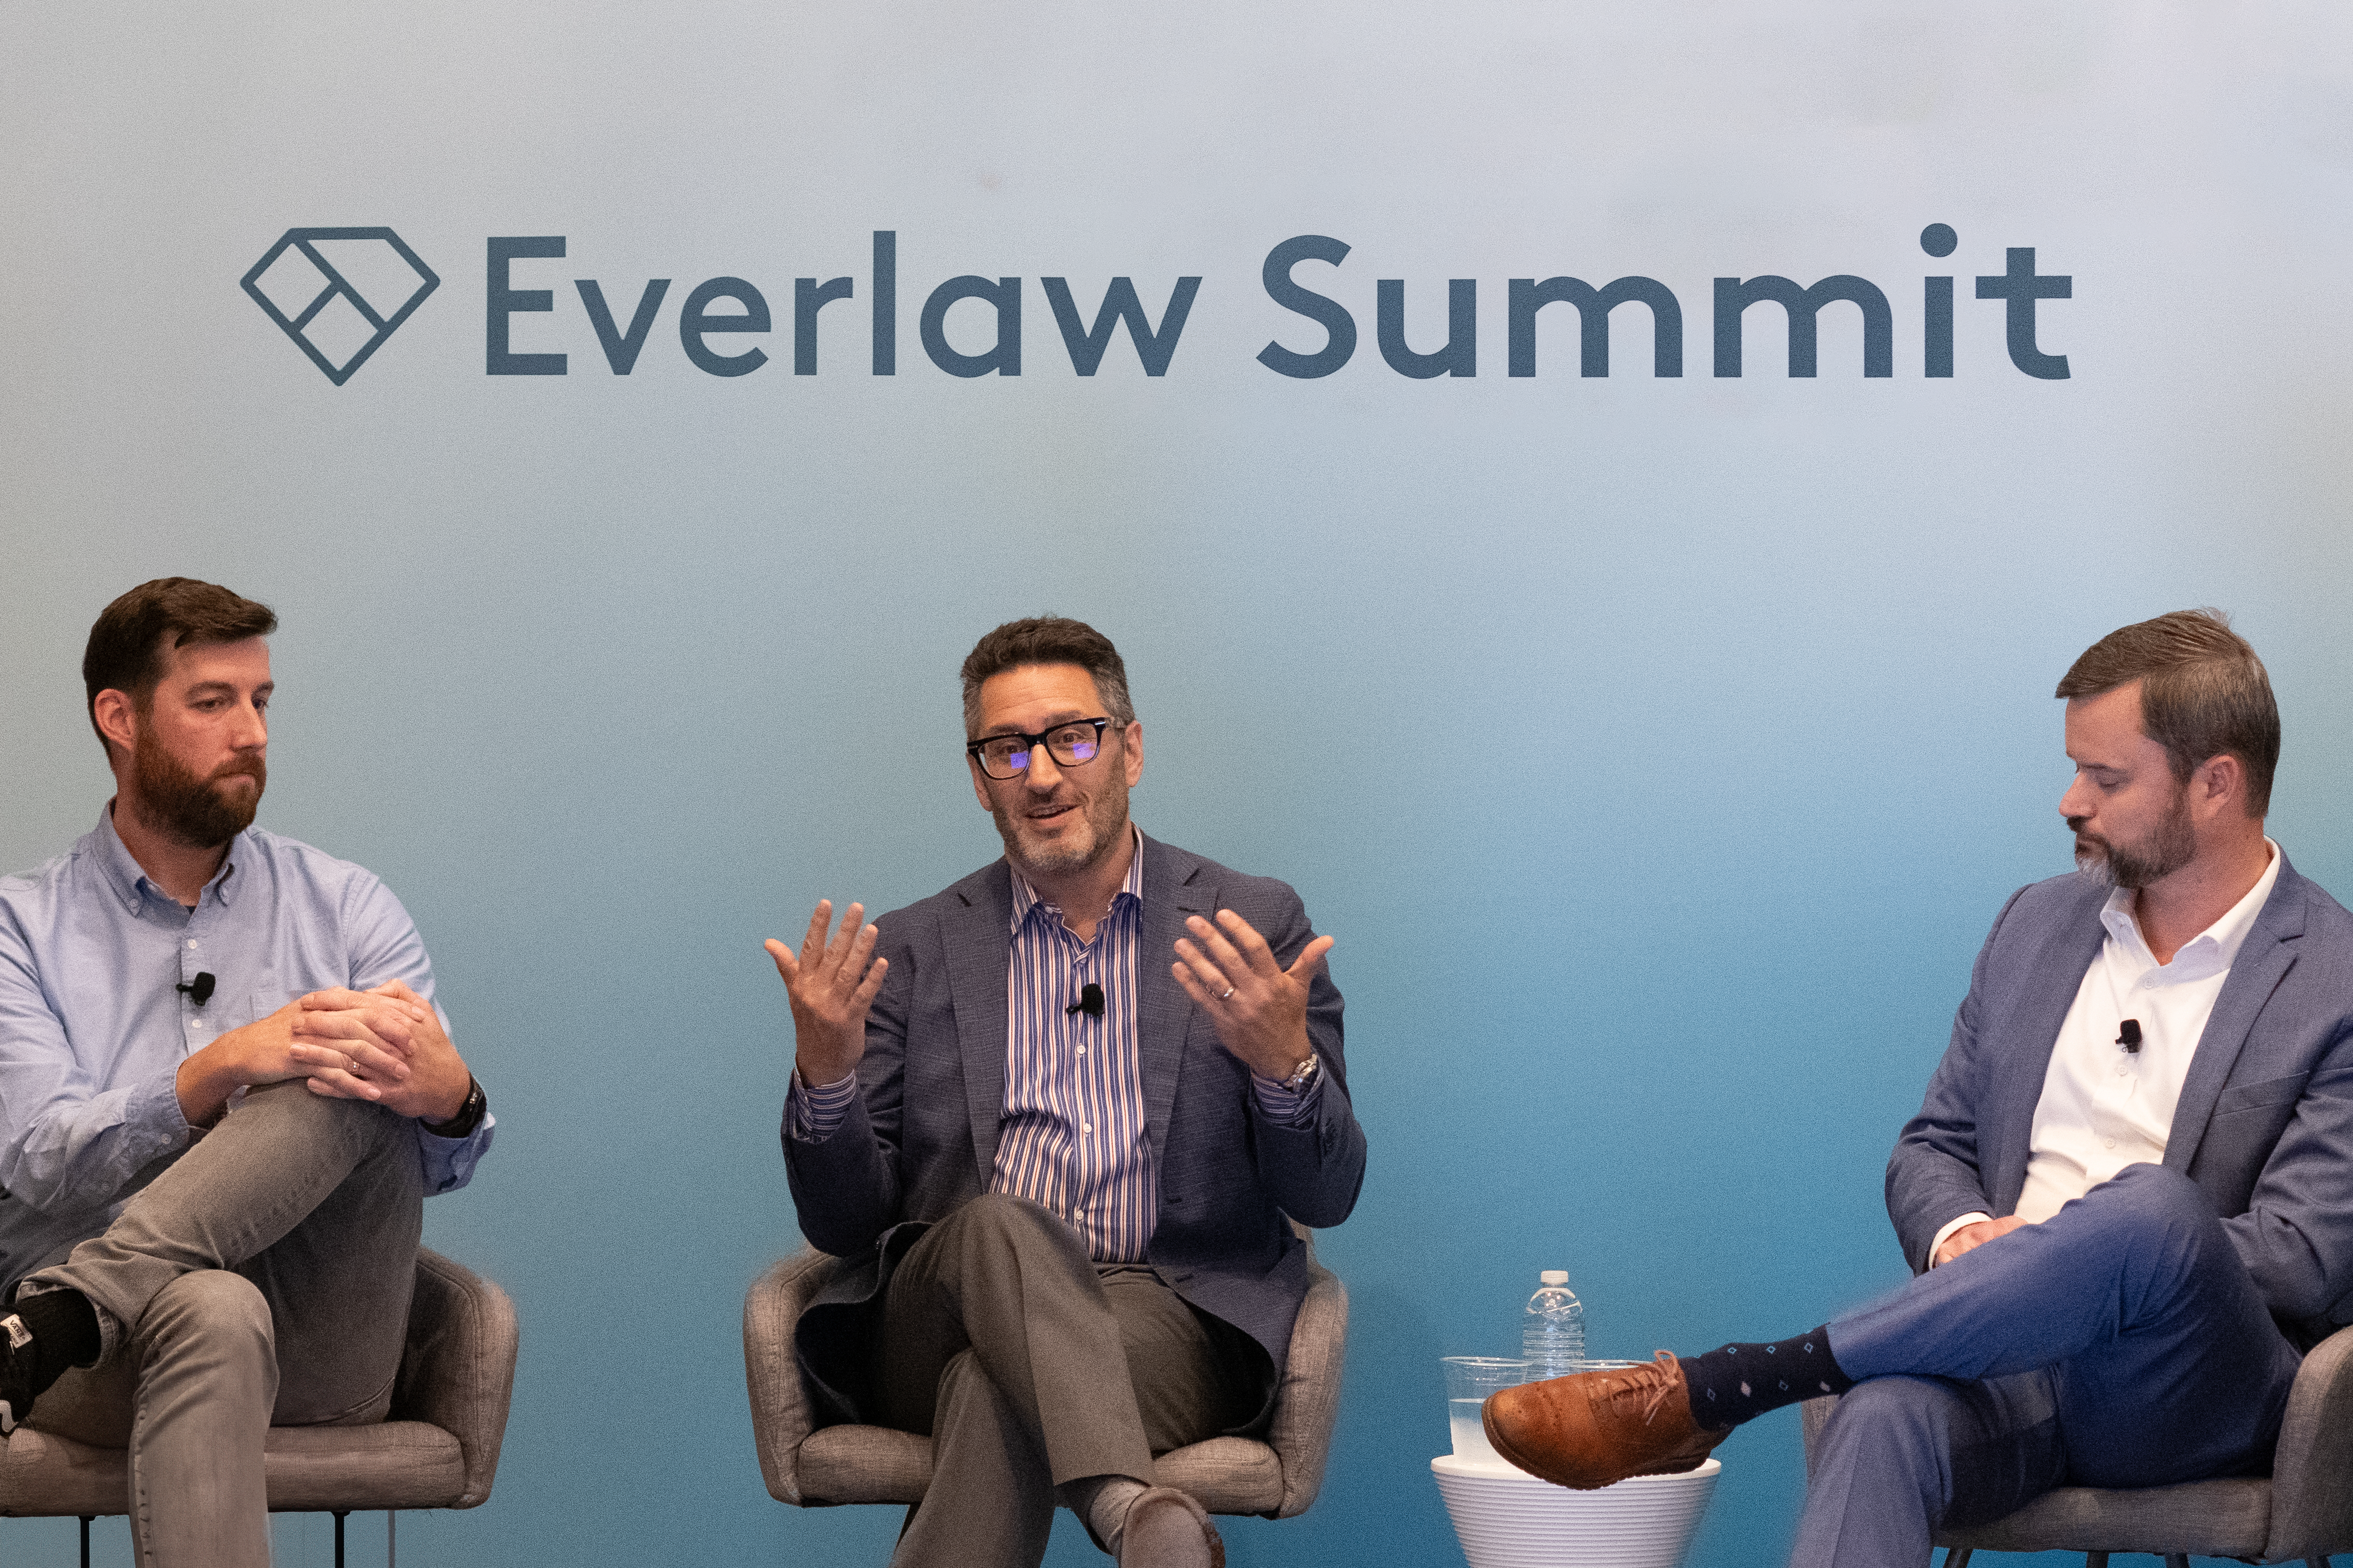 Andrew Rope, Scaled Operations Manager at Google, Randall Lehner, Deputy GC at Guaranteed Rate, Allensworth partner Tyler O'Halloran at Everlaw Summit.